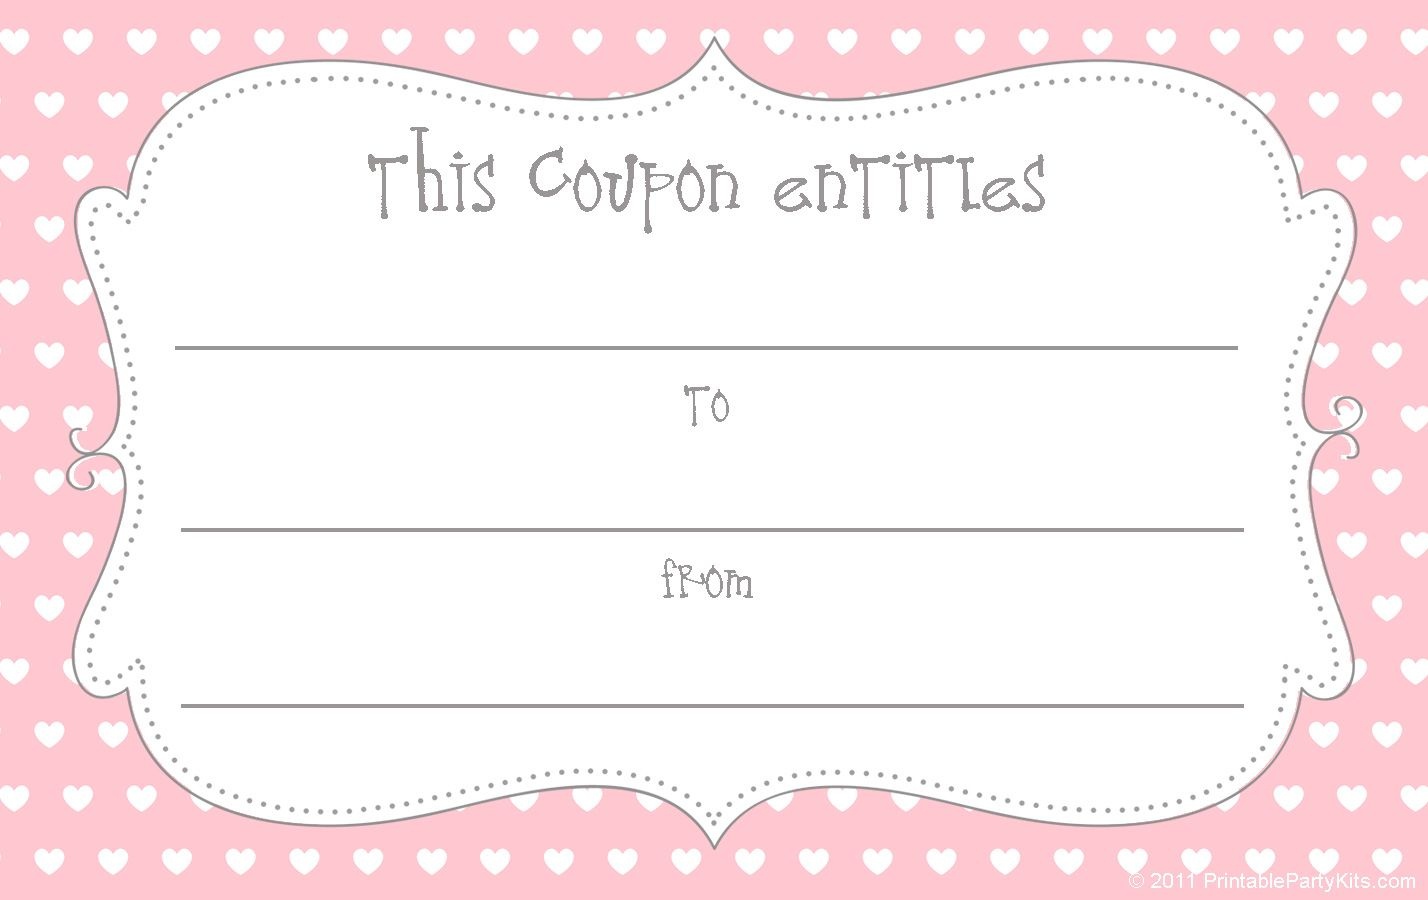 15 Sets Of Free Printable Love Coupons And Templates - Make Your Own Printable Coupons For Free